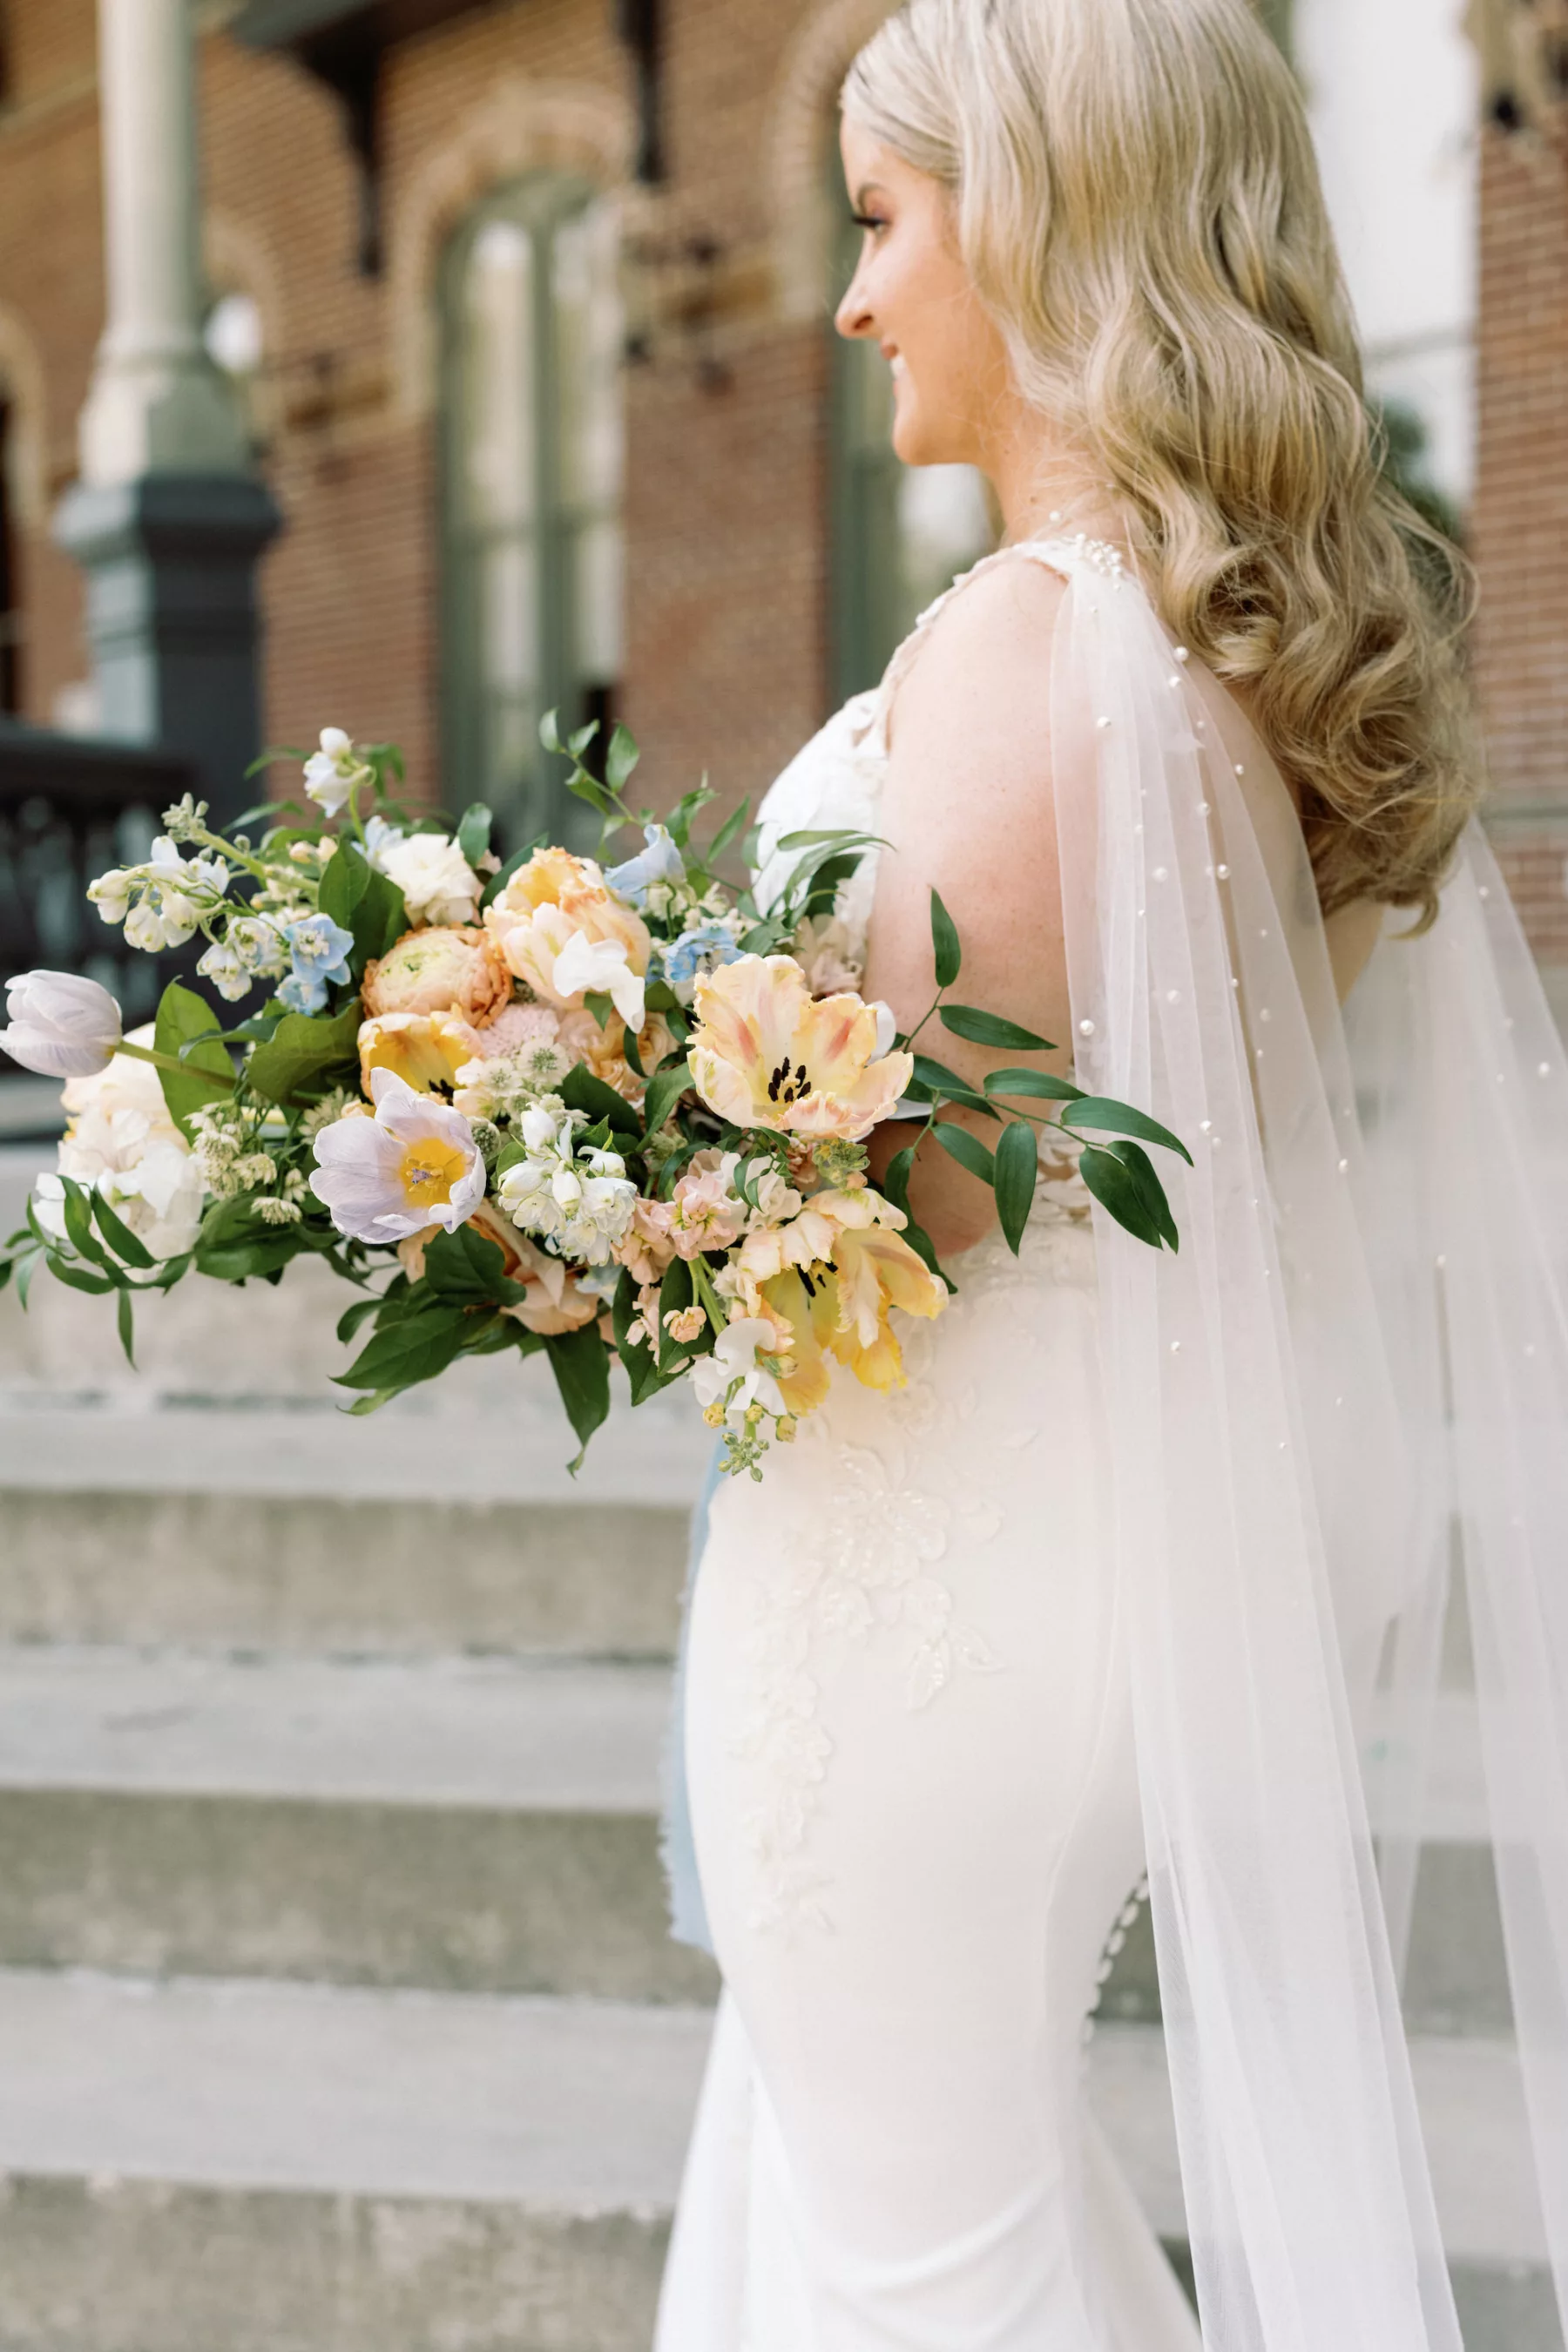 White Lace Fit and Flare Wedding Dress with Illusion Plunging Neckline and Open Back Inspiration | Pearl Veil Cape Ideas | Orange and Blue, and Greenery Spring Bouquet | Boutique Truly Forever Bridal Tampa | Photographer Dewitt For Love Photography